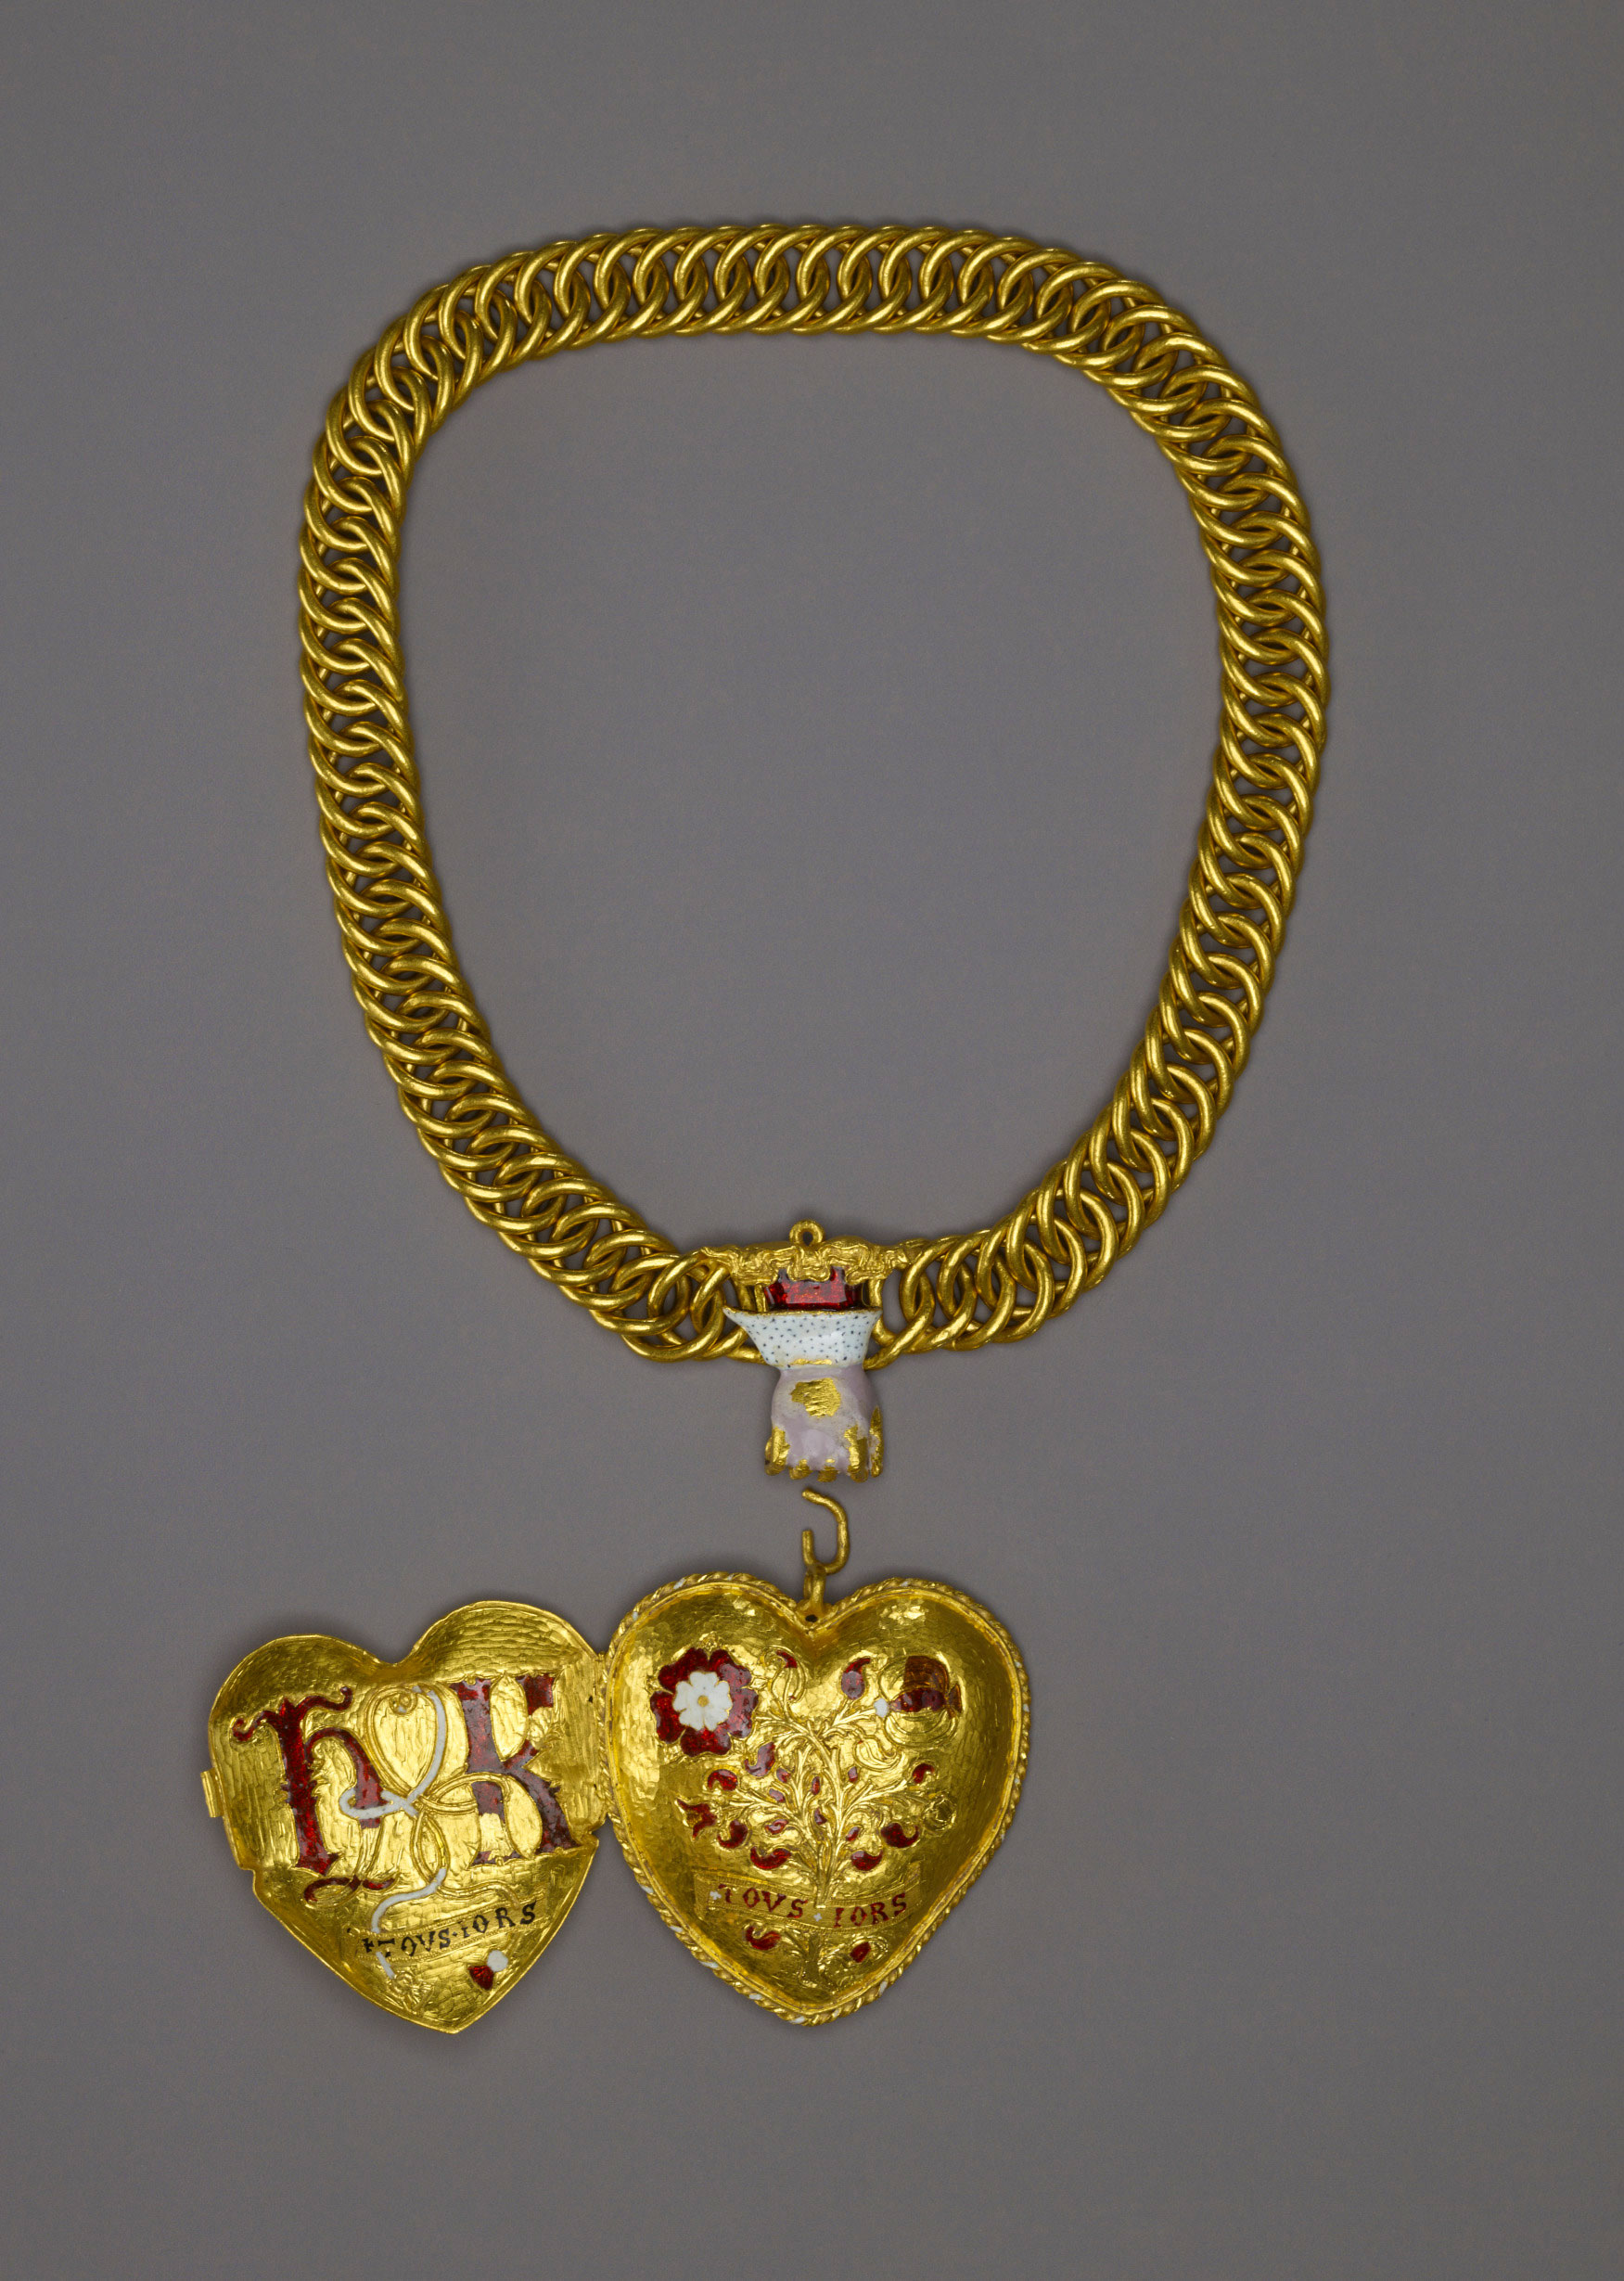 Photo of a large gold pendant on a chain. The pendant is open, showing "H K" "TOVS IORS" on one side and a floral design with "TOVS IORS" on the other.